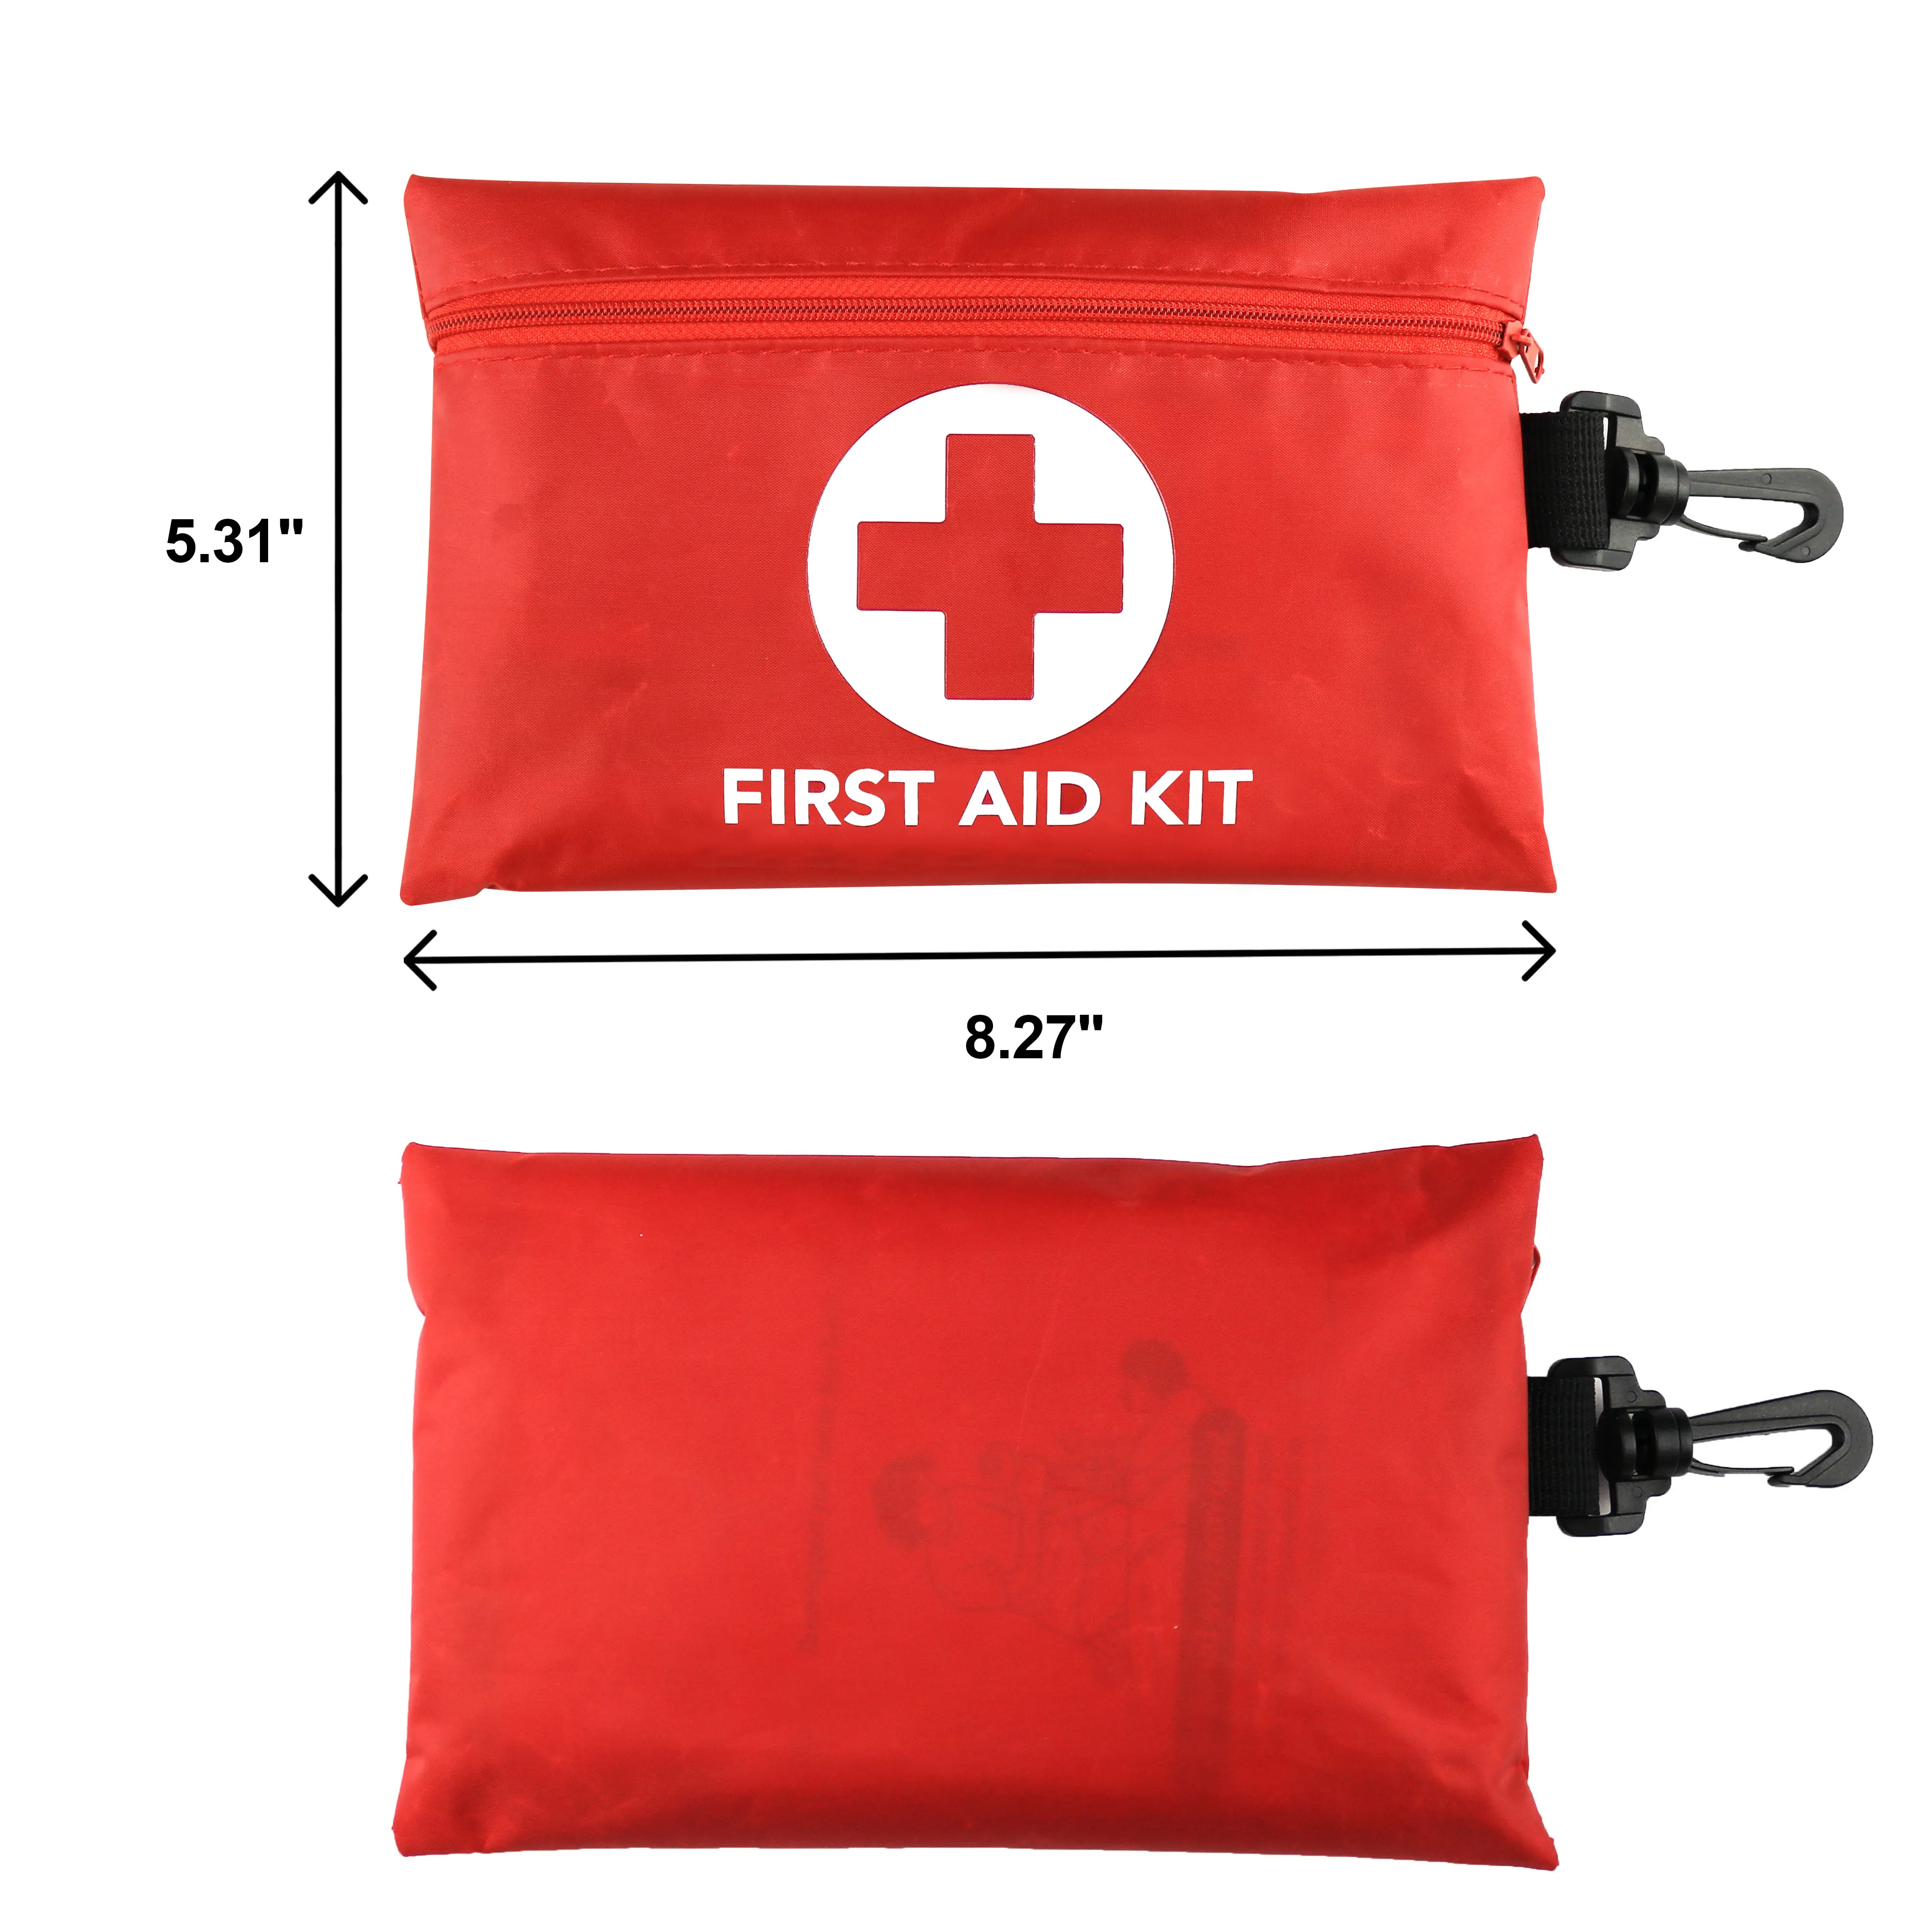 First Aid Kit Emergency Bag Mini Pet Box Waterproof Camping Survival Red Portable First Aid Medical Kit For Workplace Outdoor